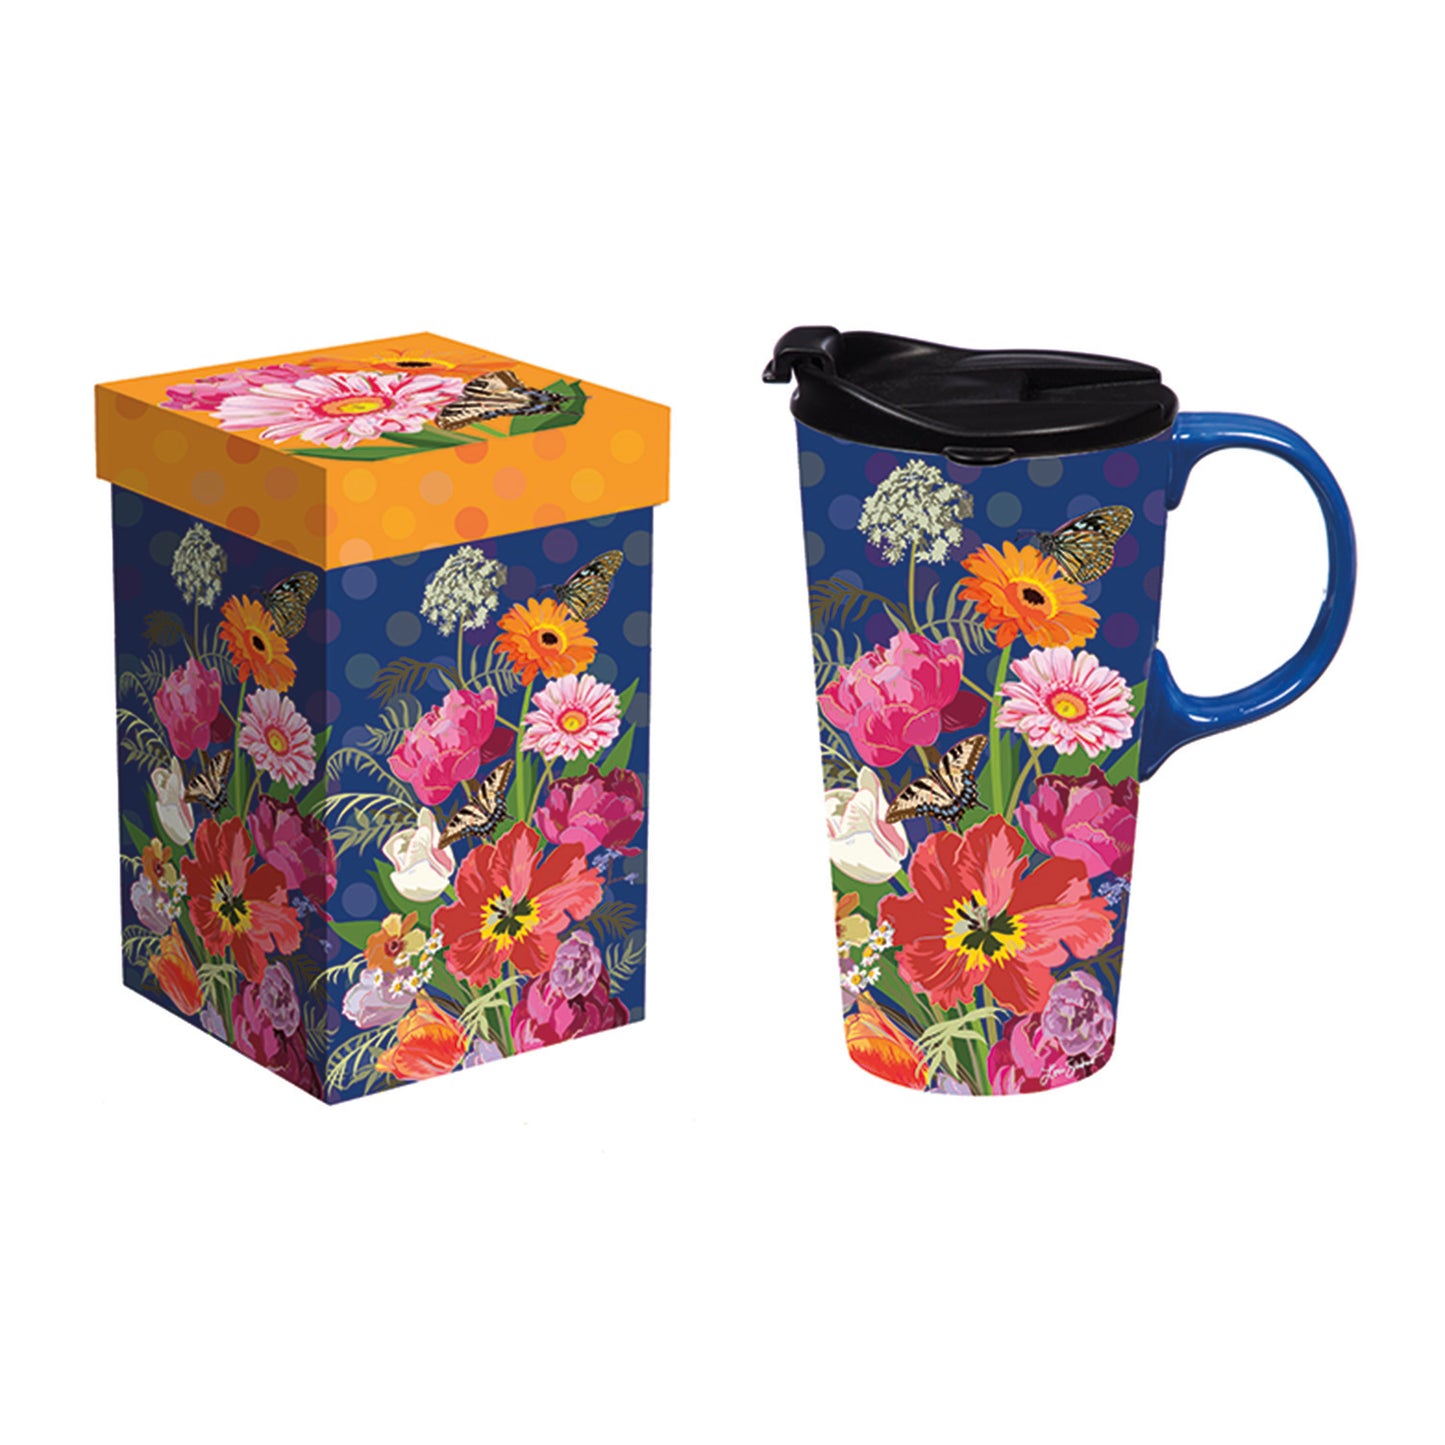 This beautiful garden themed ceramic travel mug makes a lovely gift